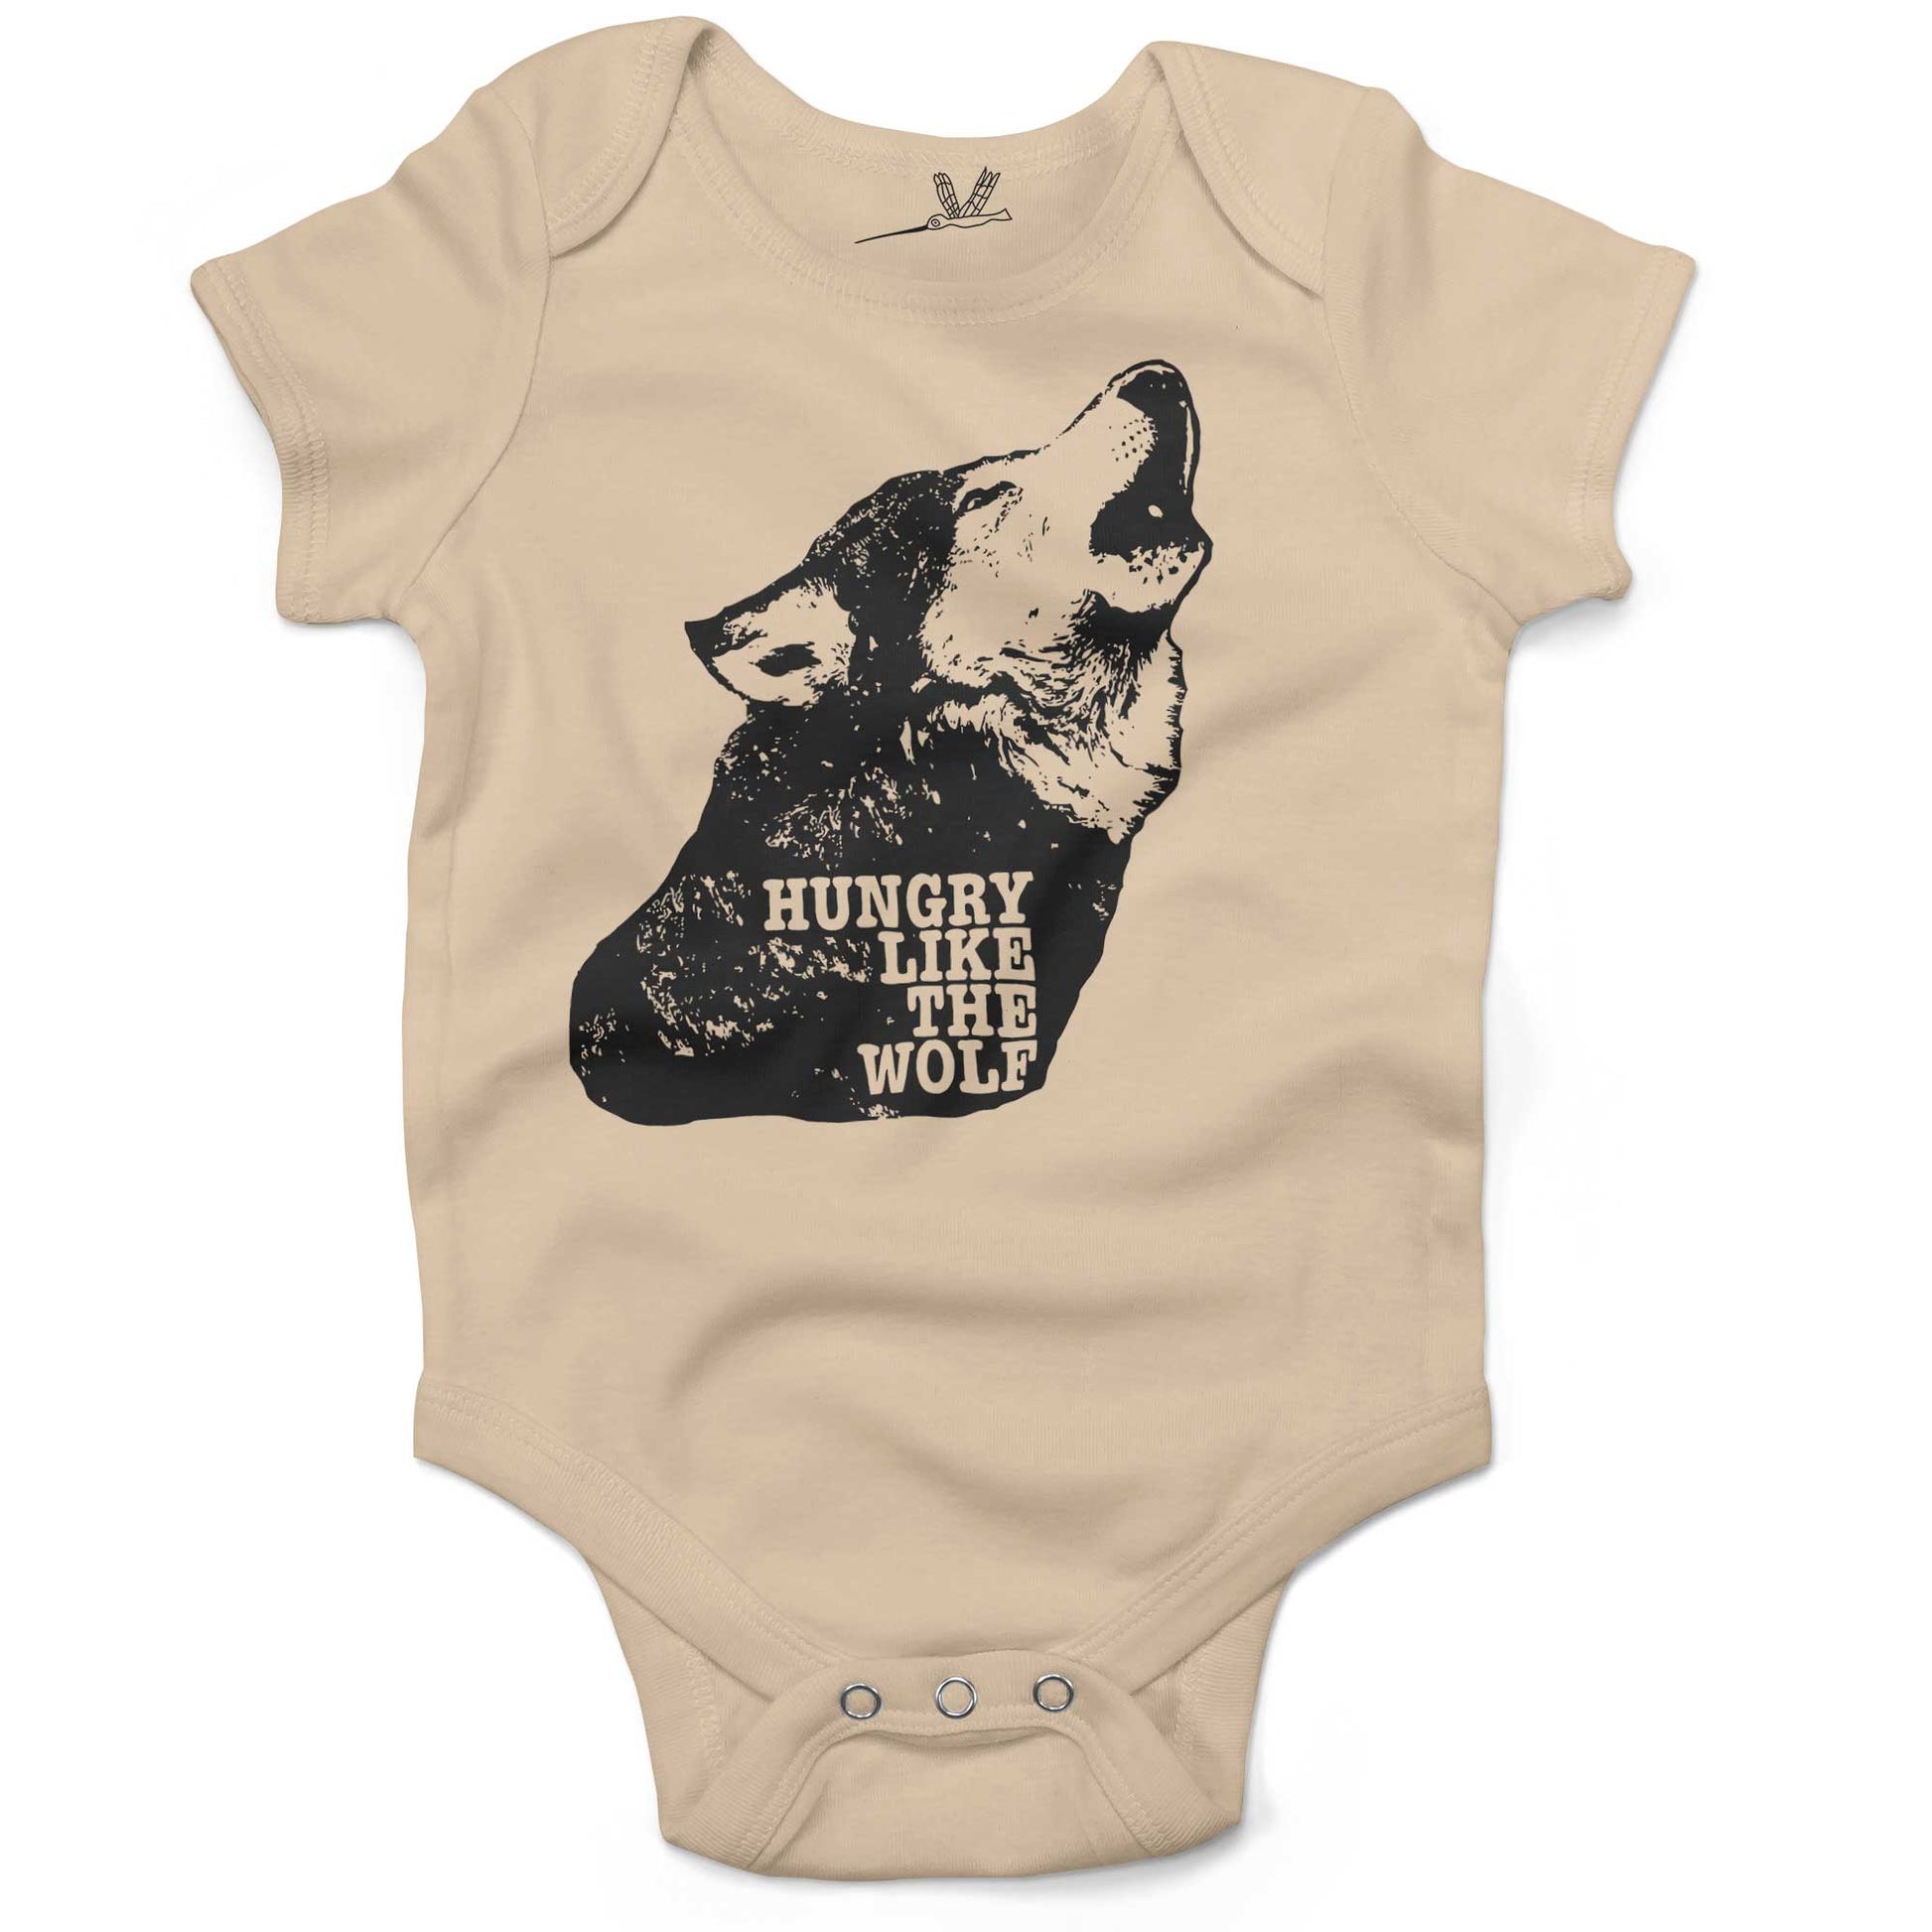 Hungry Like The Wolf Infant Bodysuit or Raglan Baby Tee-Organic Natural-3-6 months